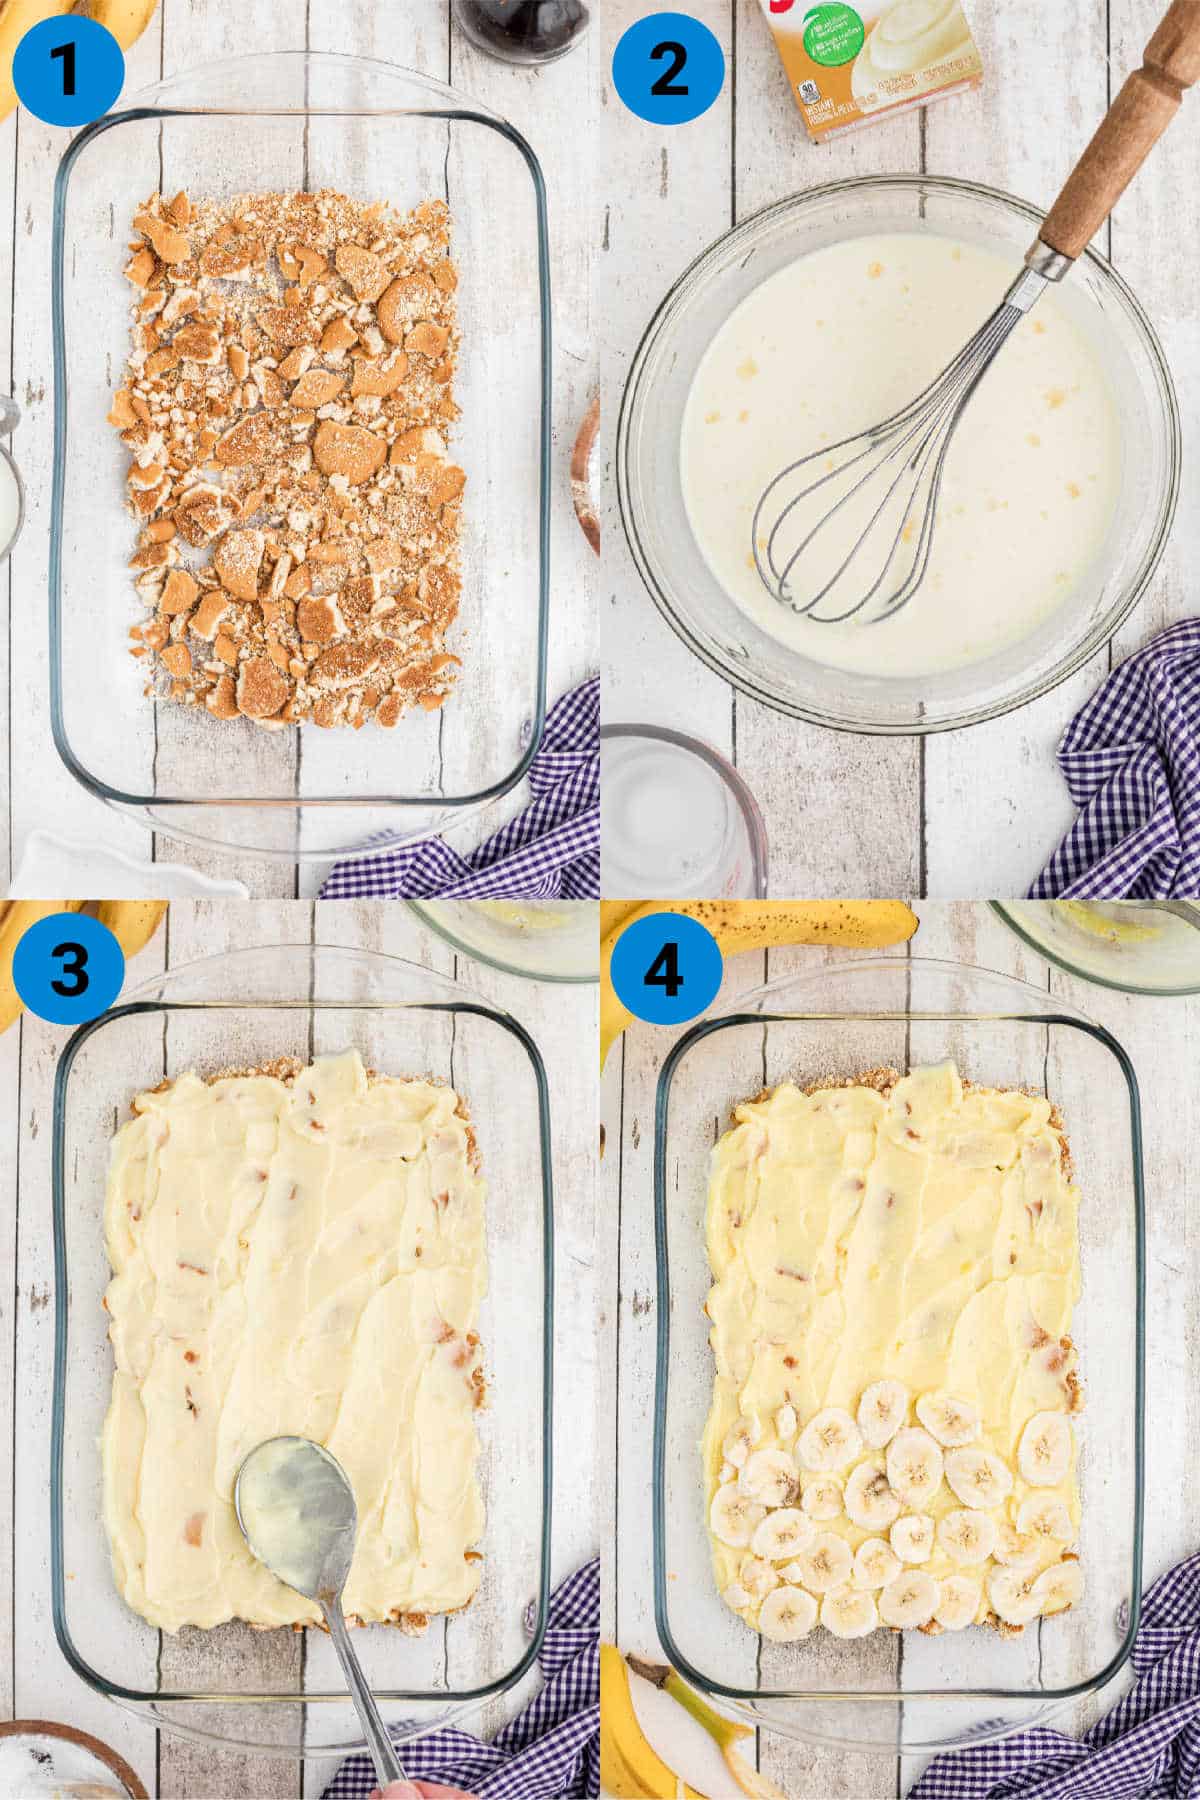 collage of four images showing how to make this easy no bake banana pudding recipe - steps 1 to 4.